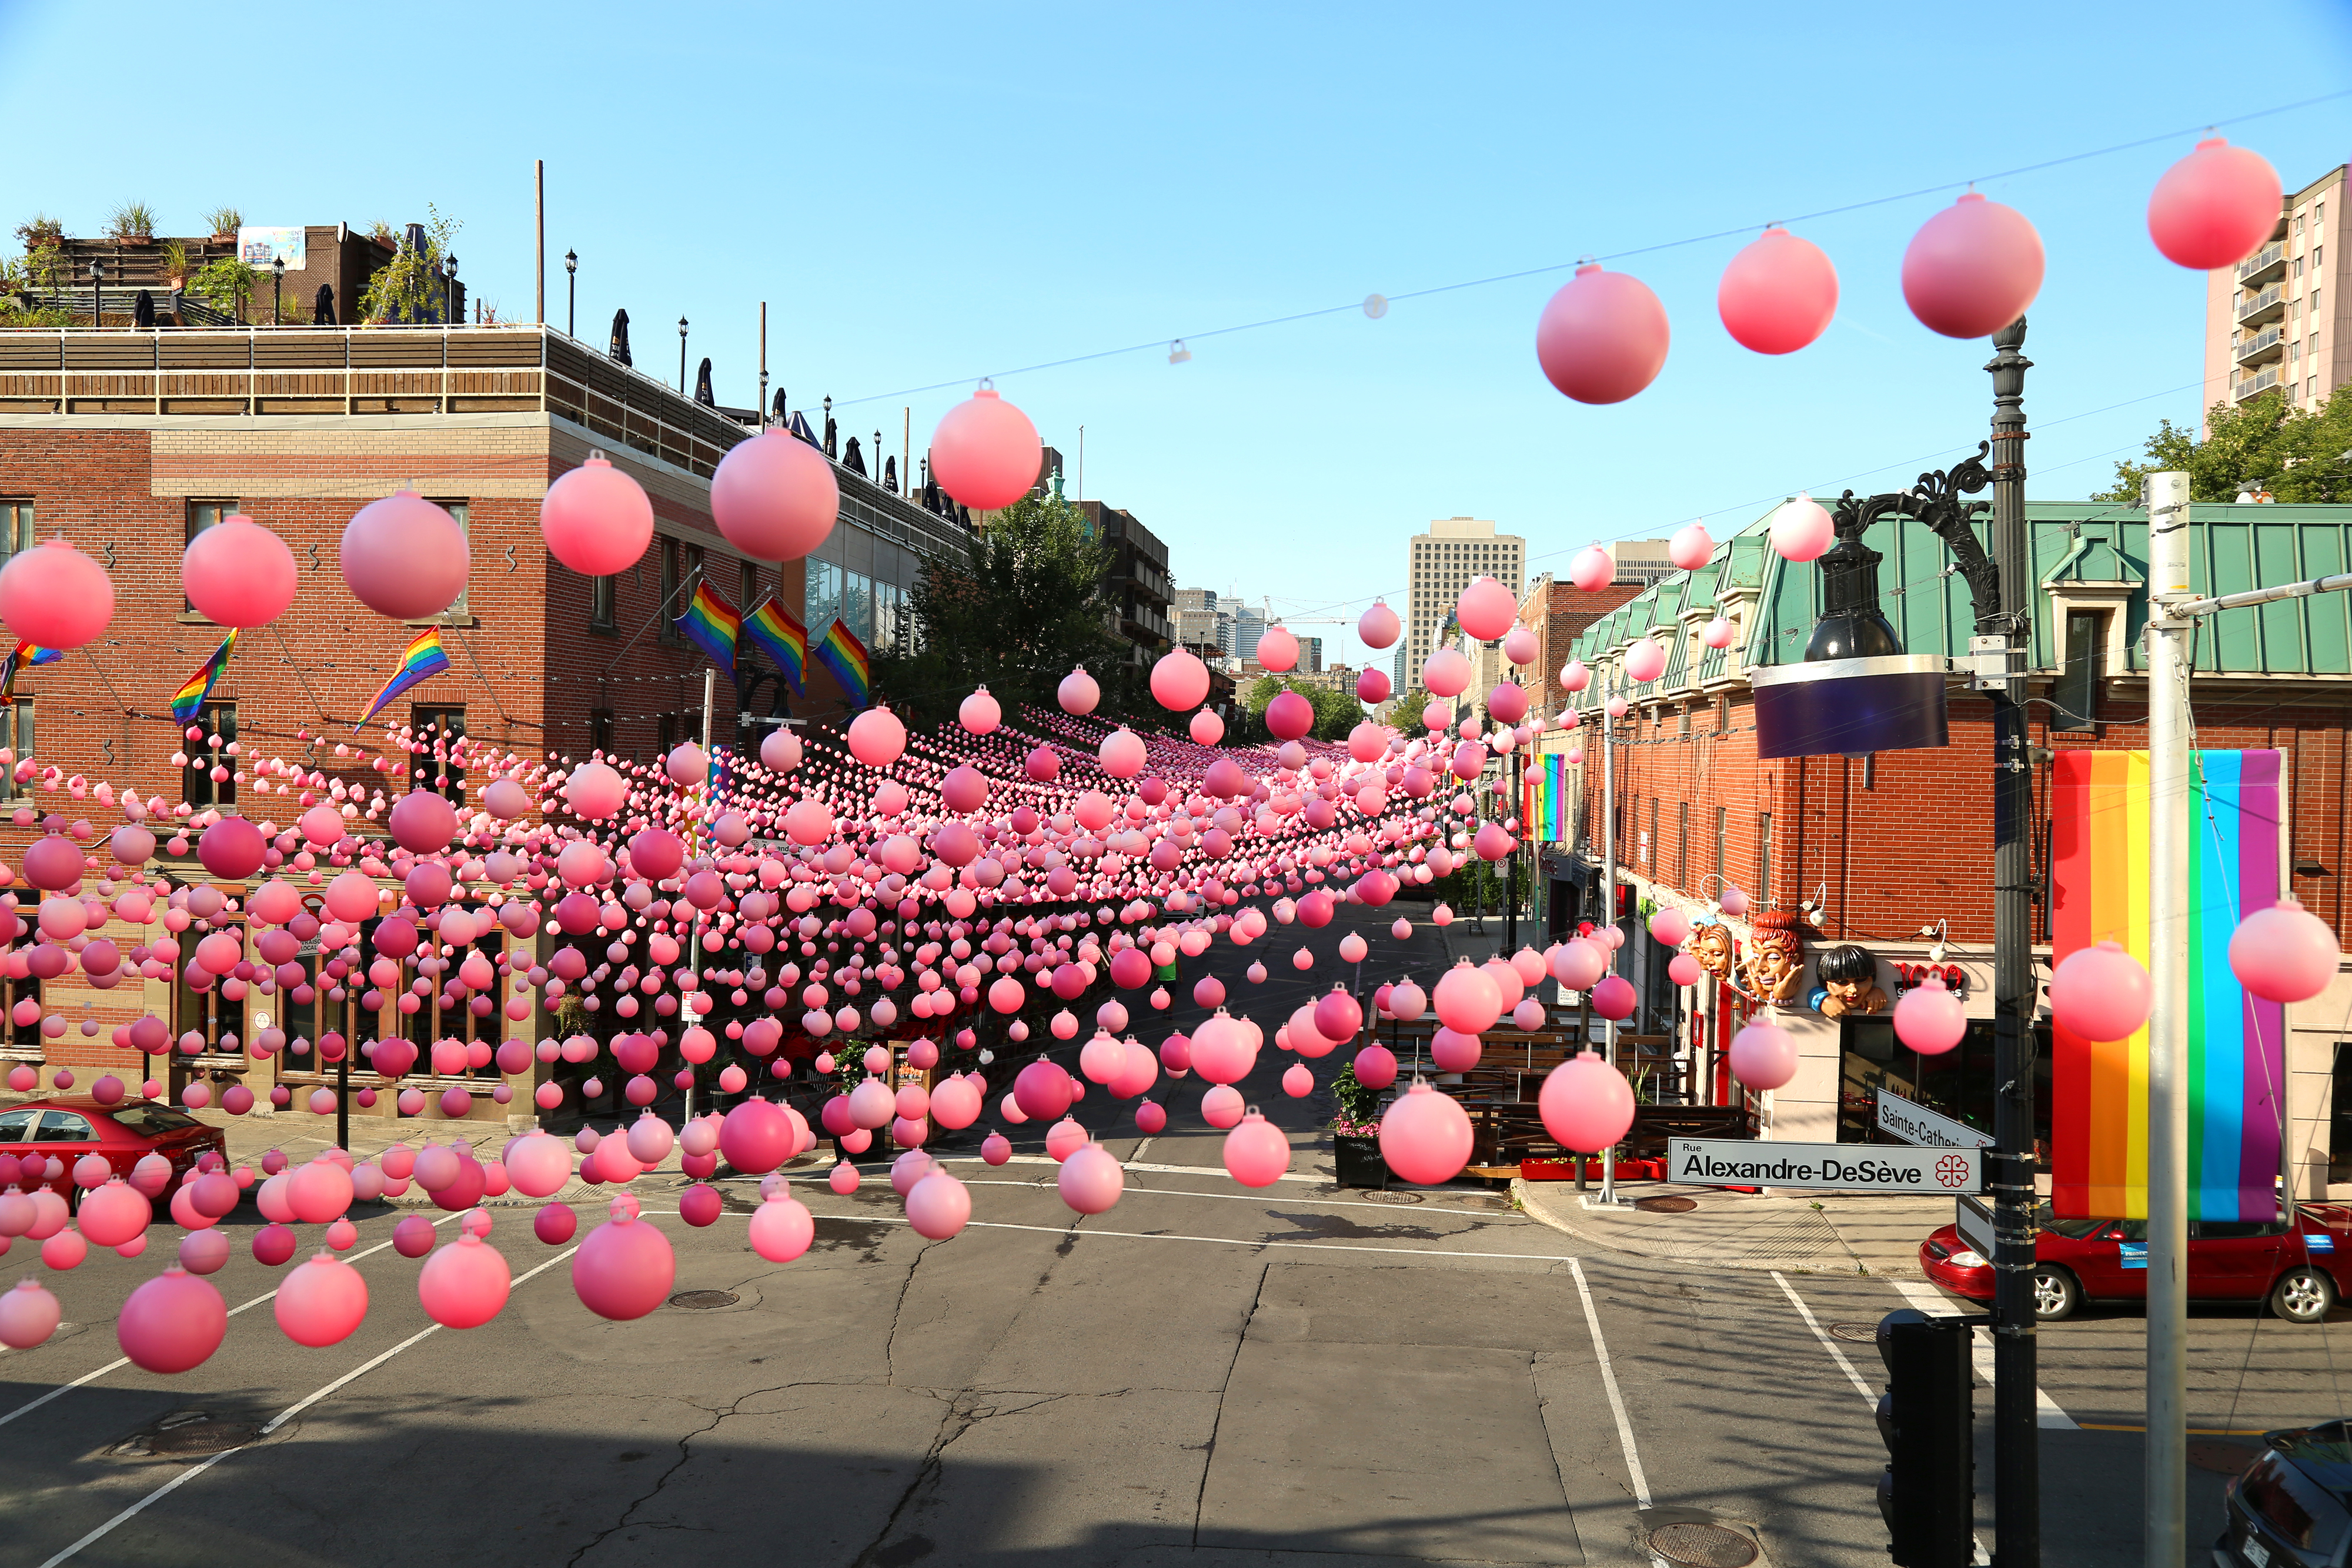 The Village's summertime Boules Roses installation